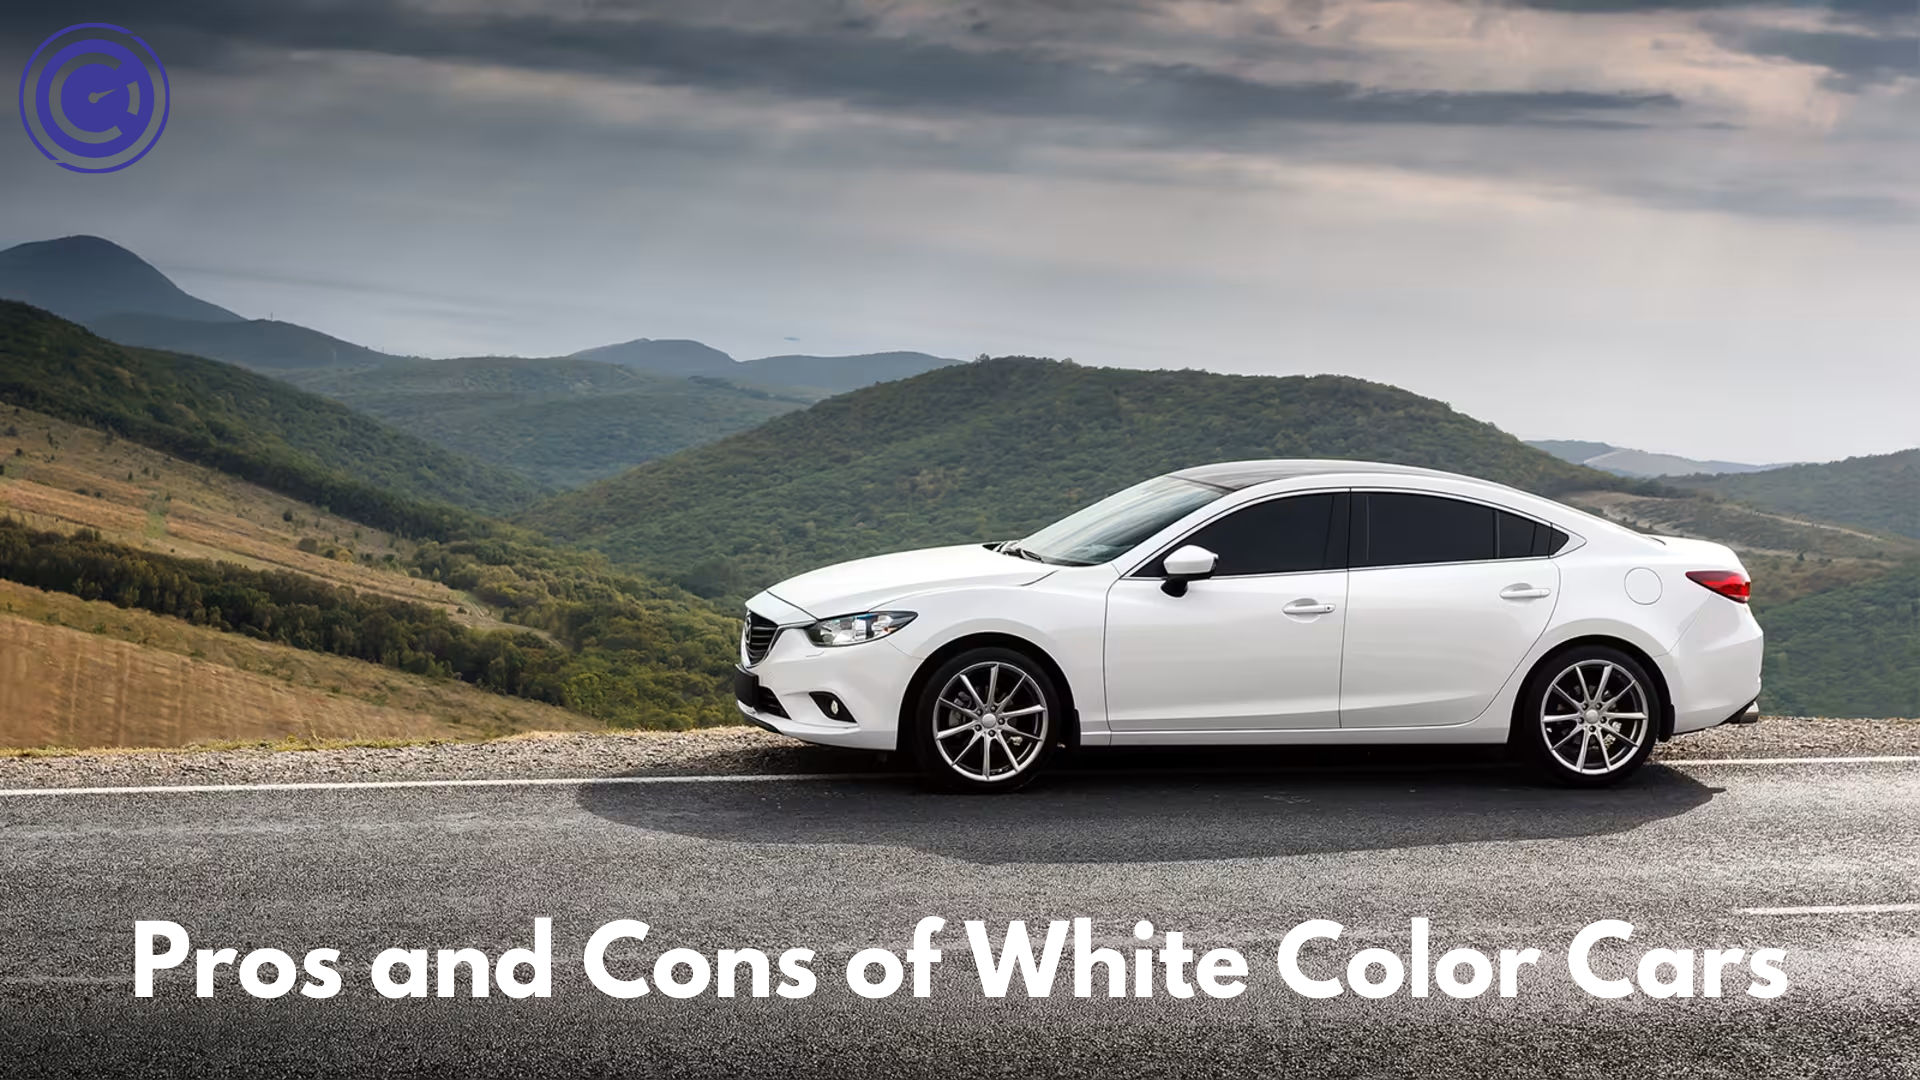 Pros and Cons of White Color Cars